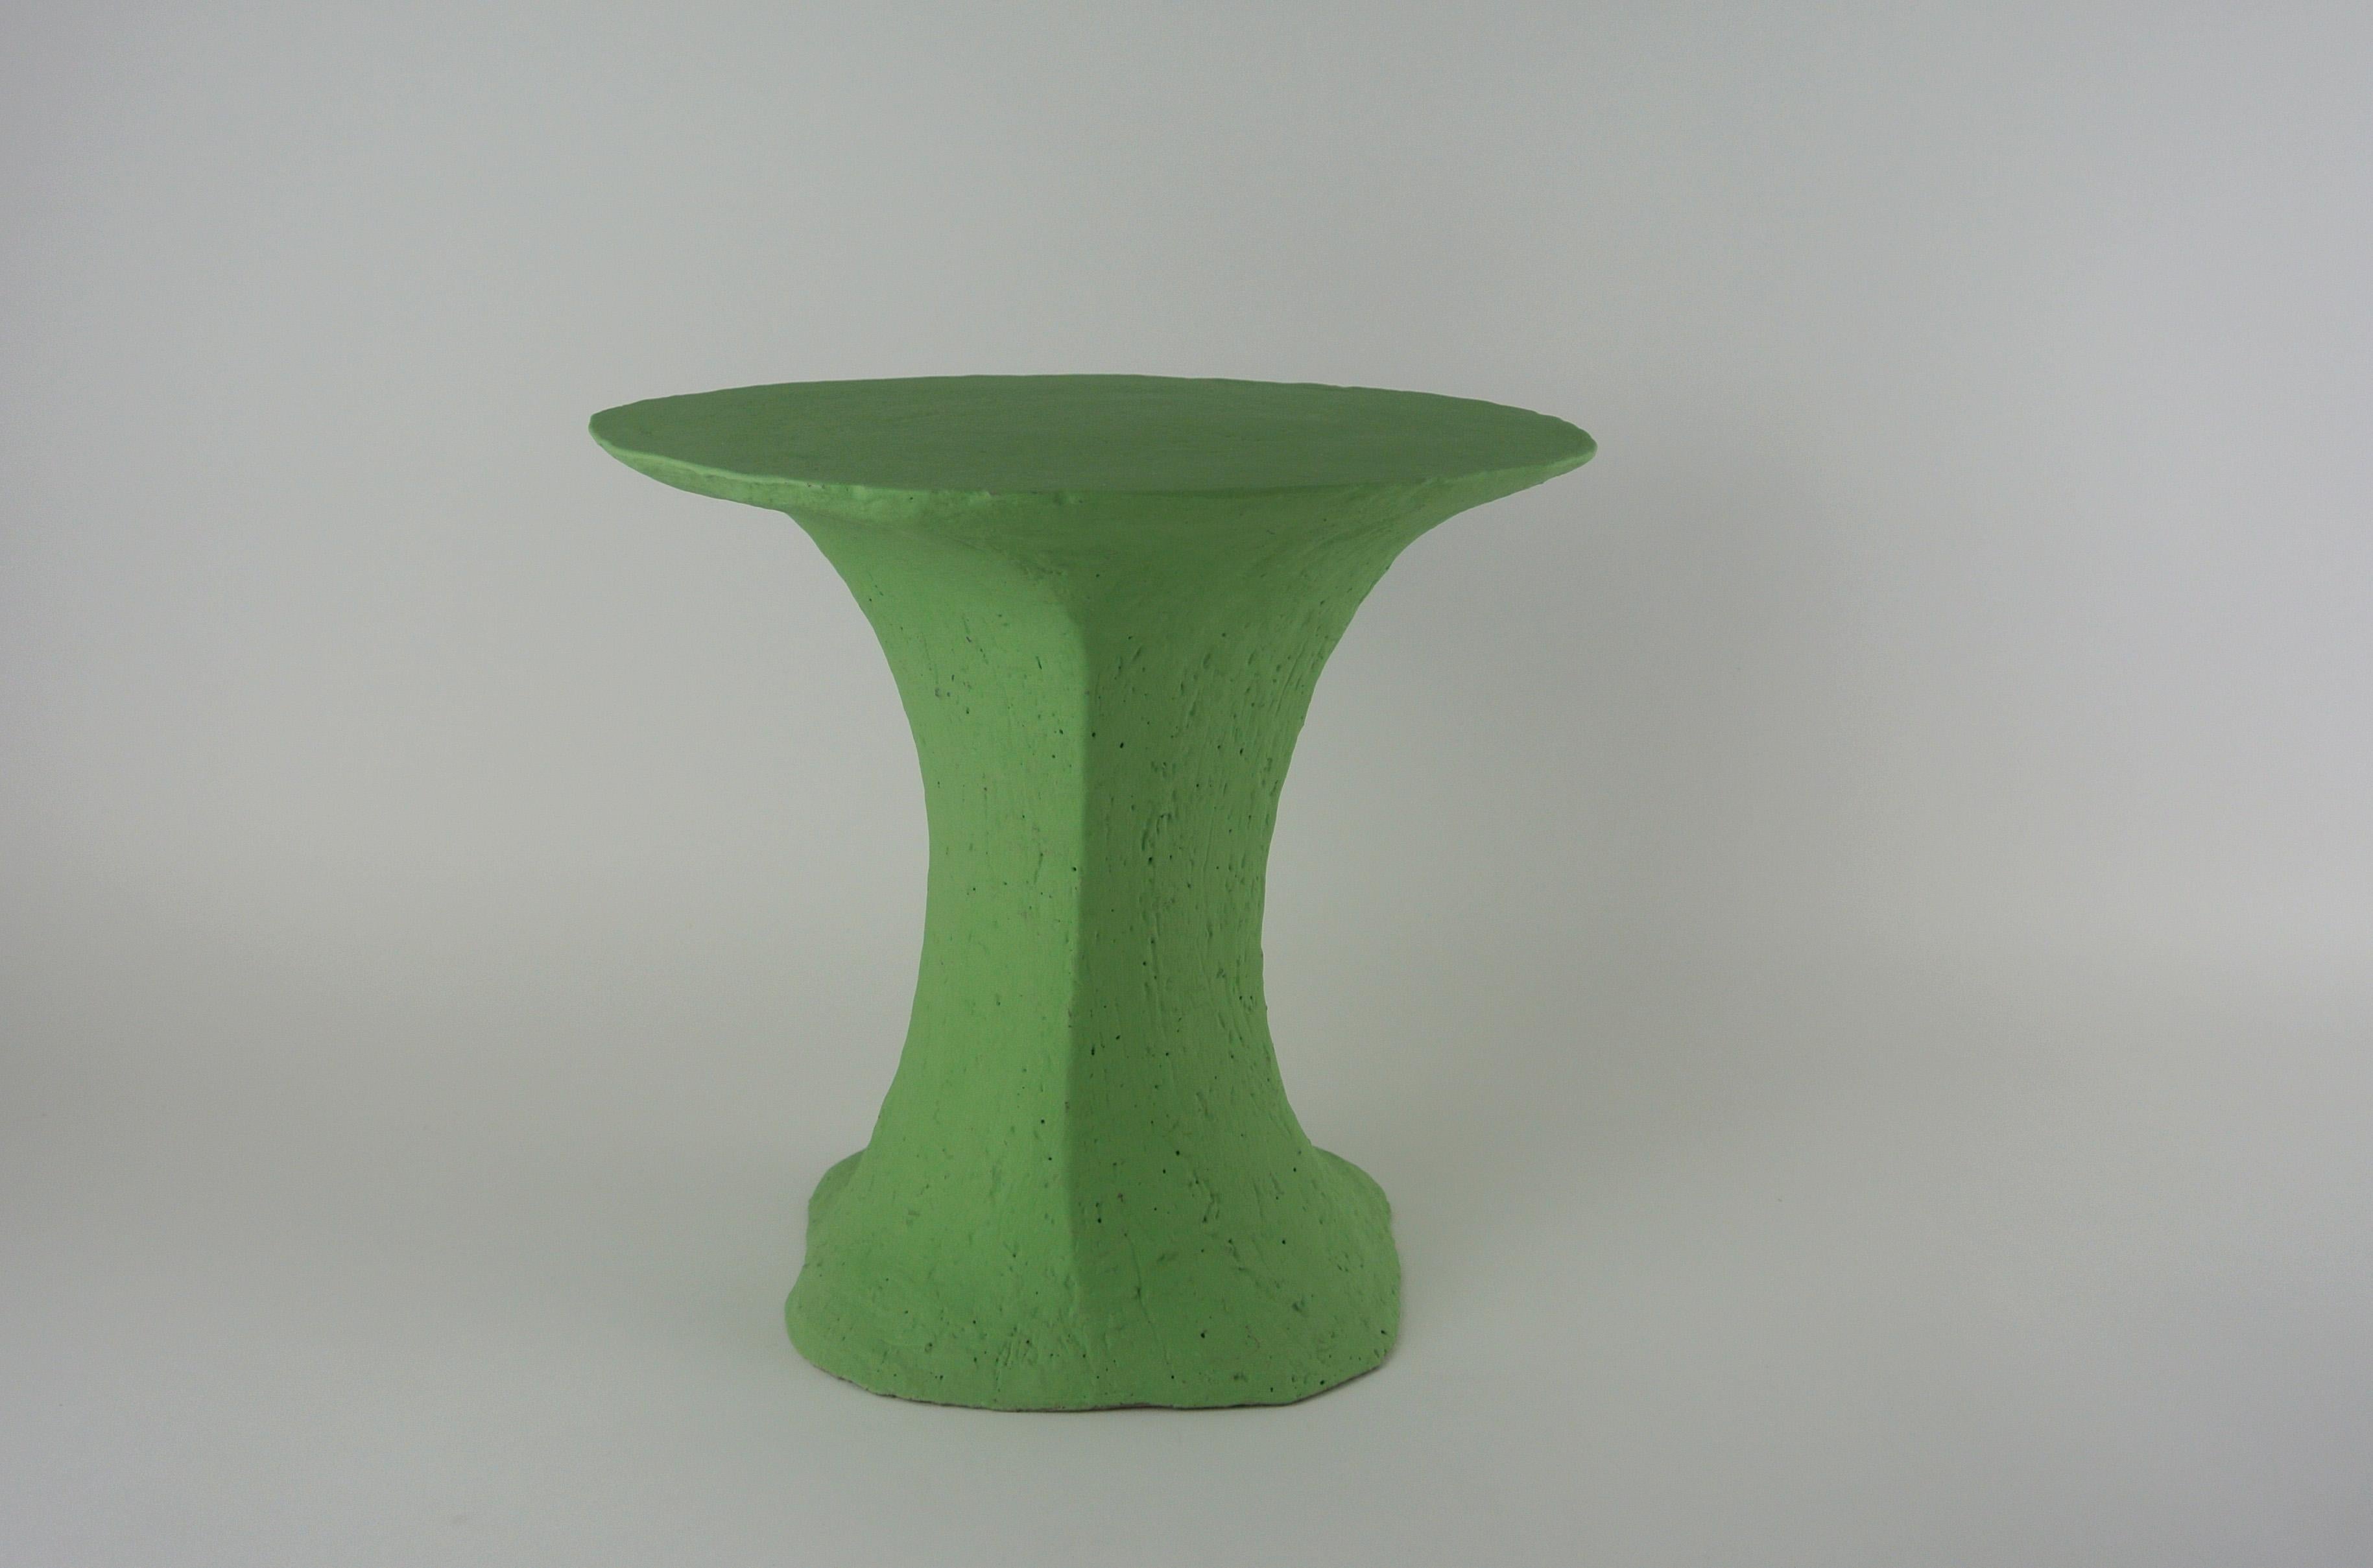 Asymmetric platform table made from rough grey stoneware with matte lichen green engobe. Grey fire sand subtly visible on the surface.